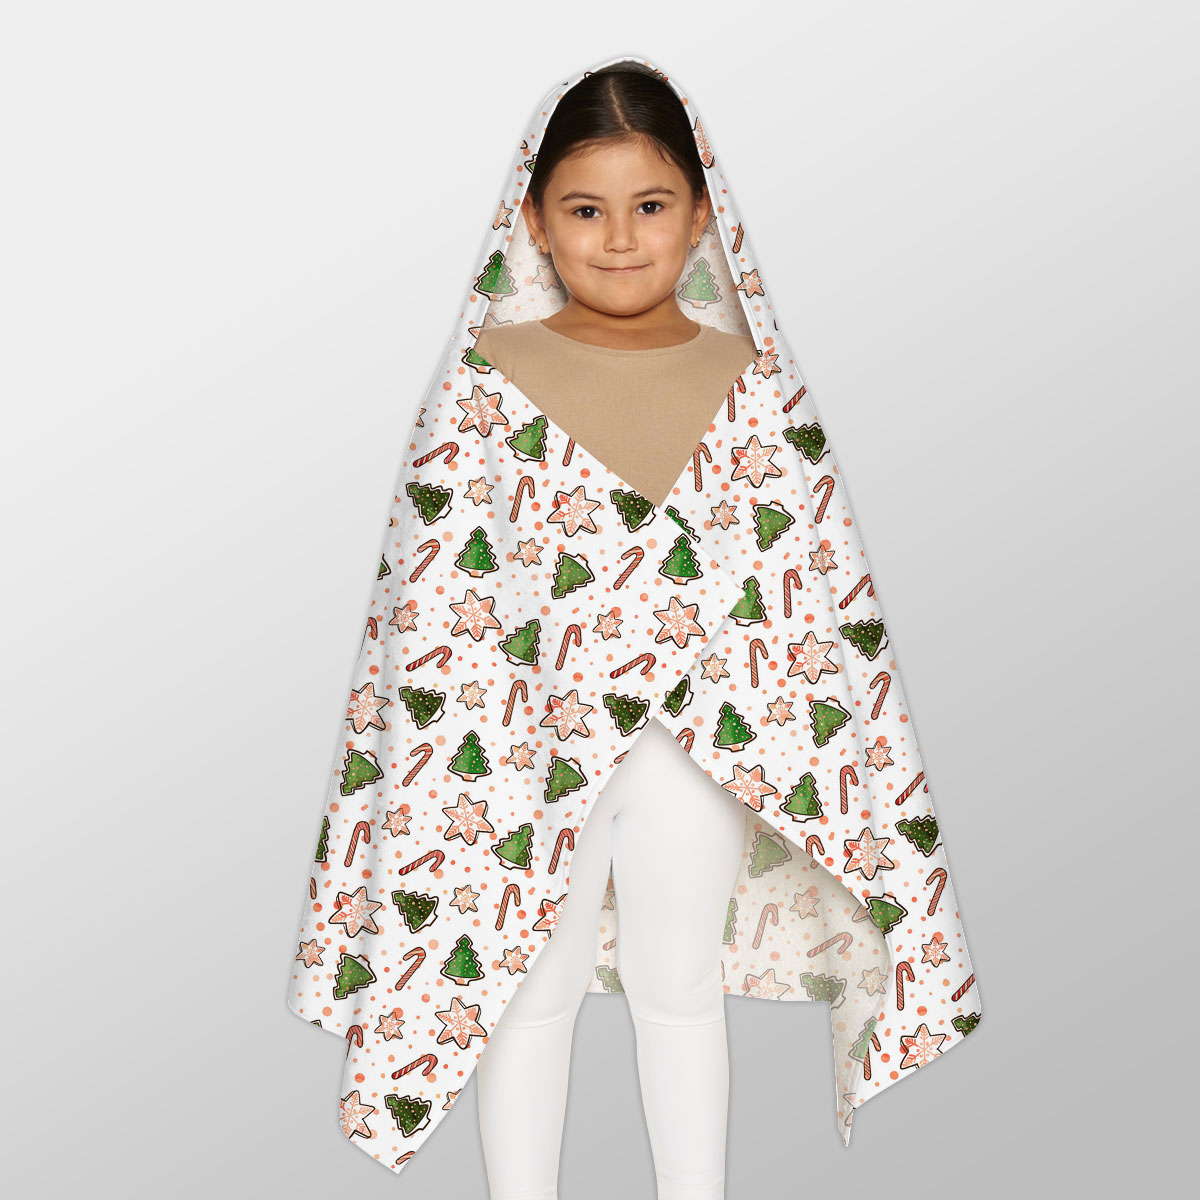 Christmas Tree, Pine Tree, Snowflake And Candy Canes Youth Hooded Towel